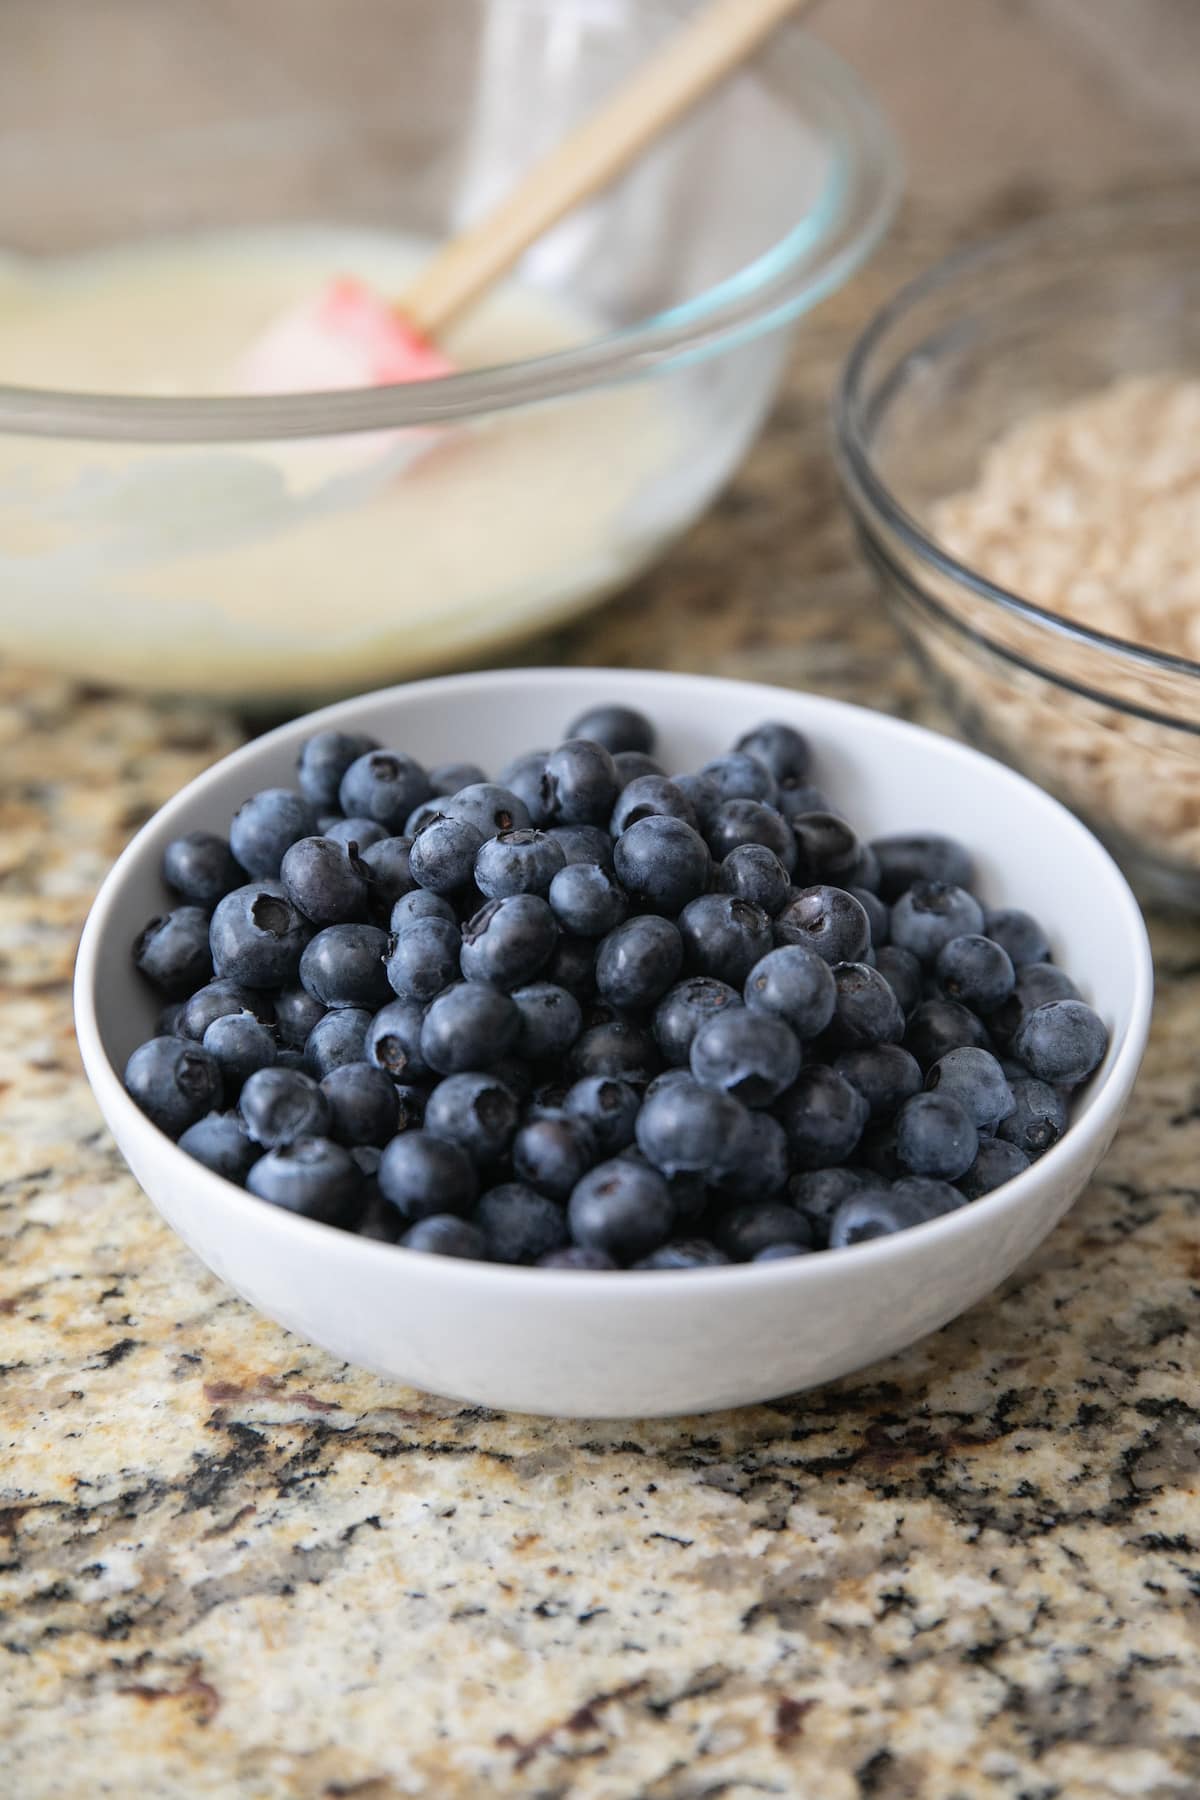 washed room temperature blueberries in a white bowl with two other bowls behind it